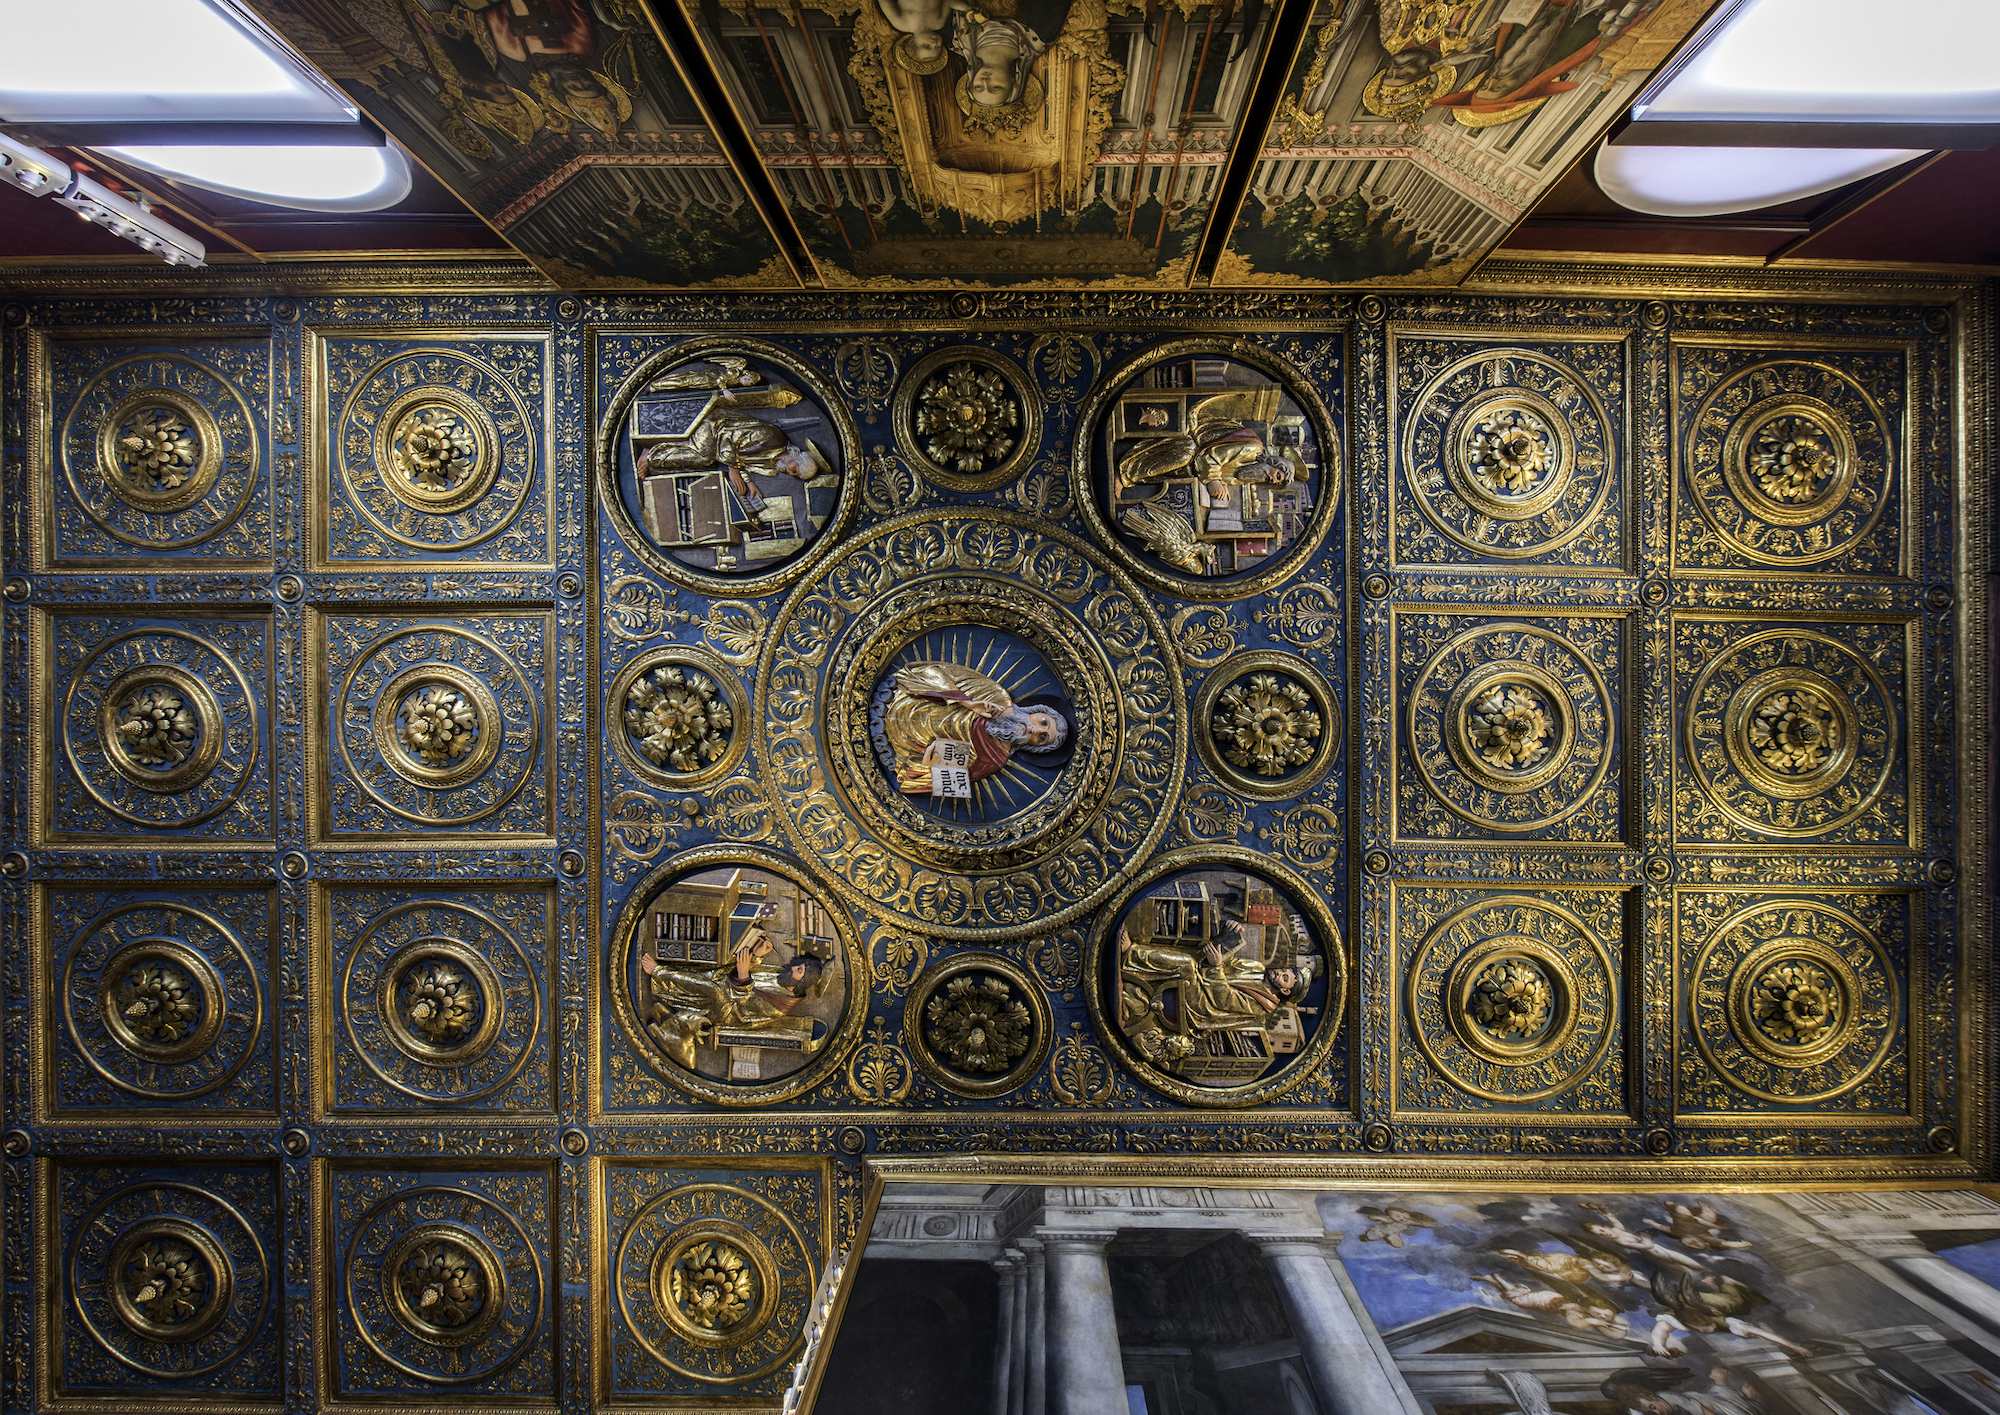 Gallerie dell Accademia ceiling